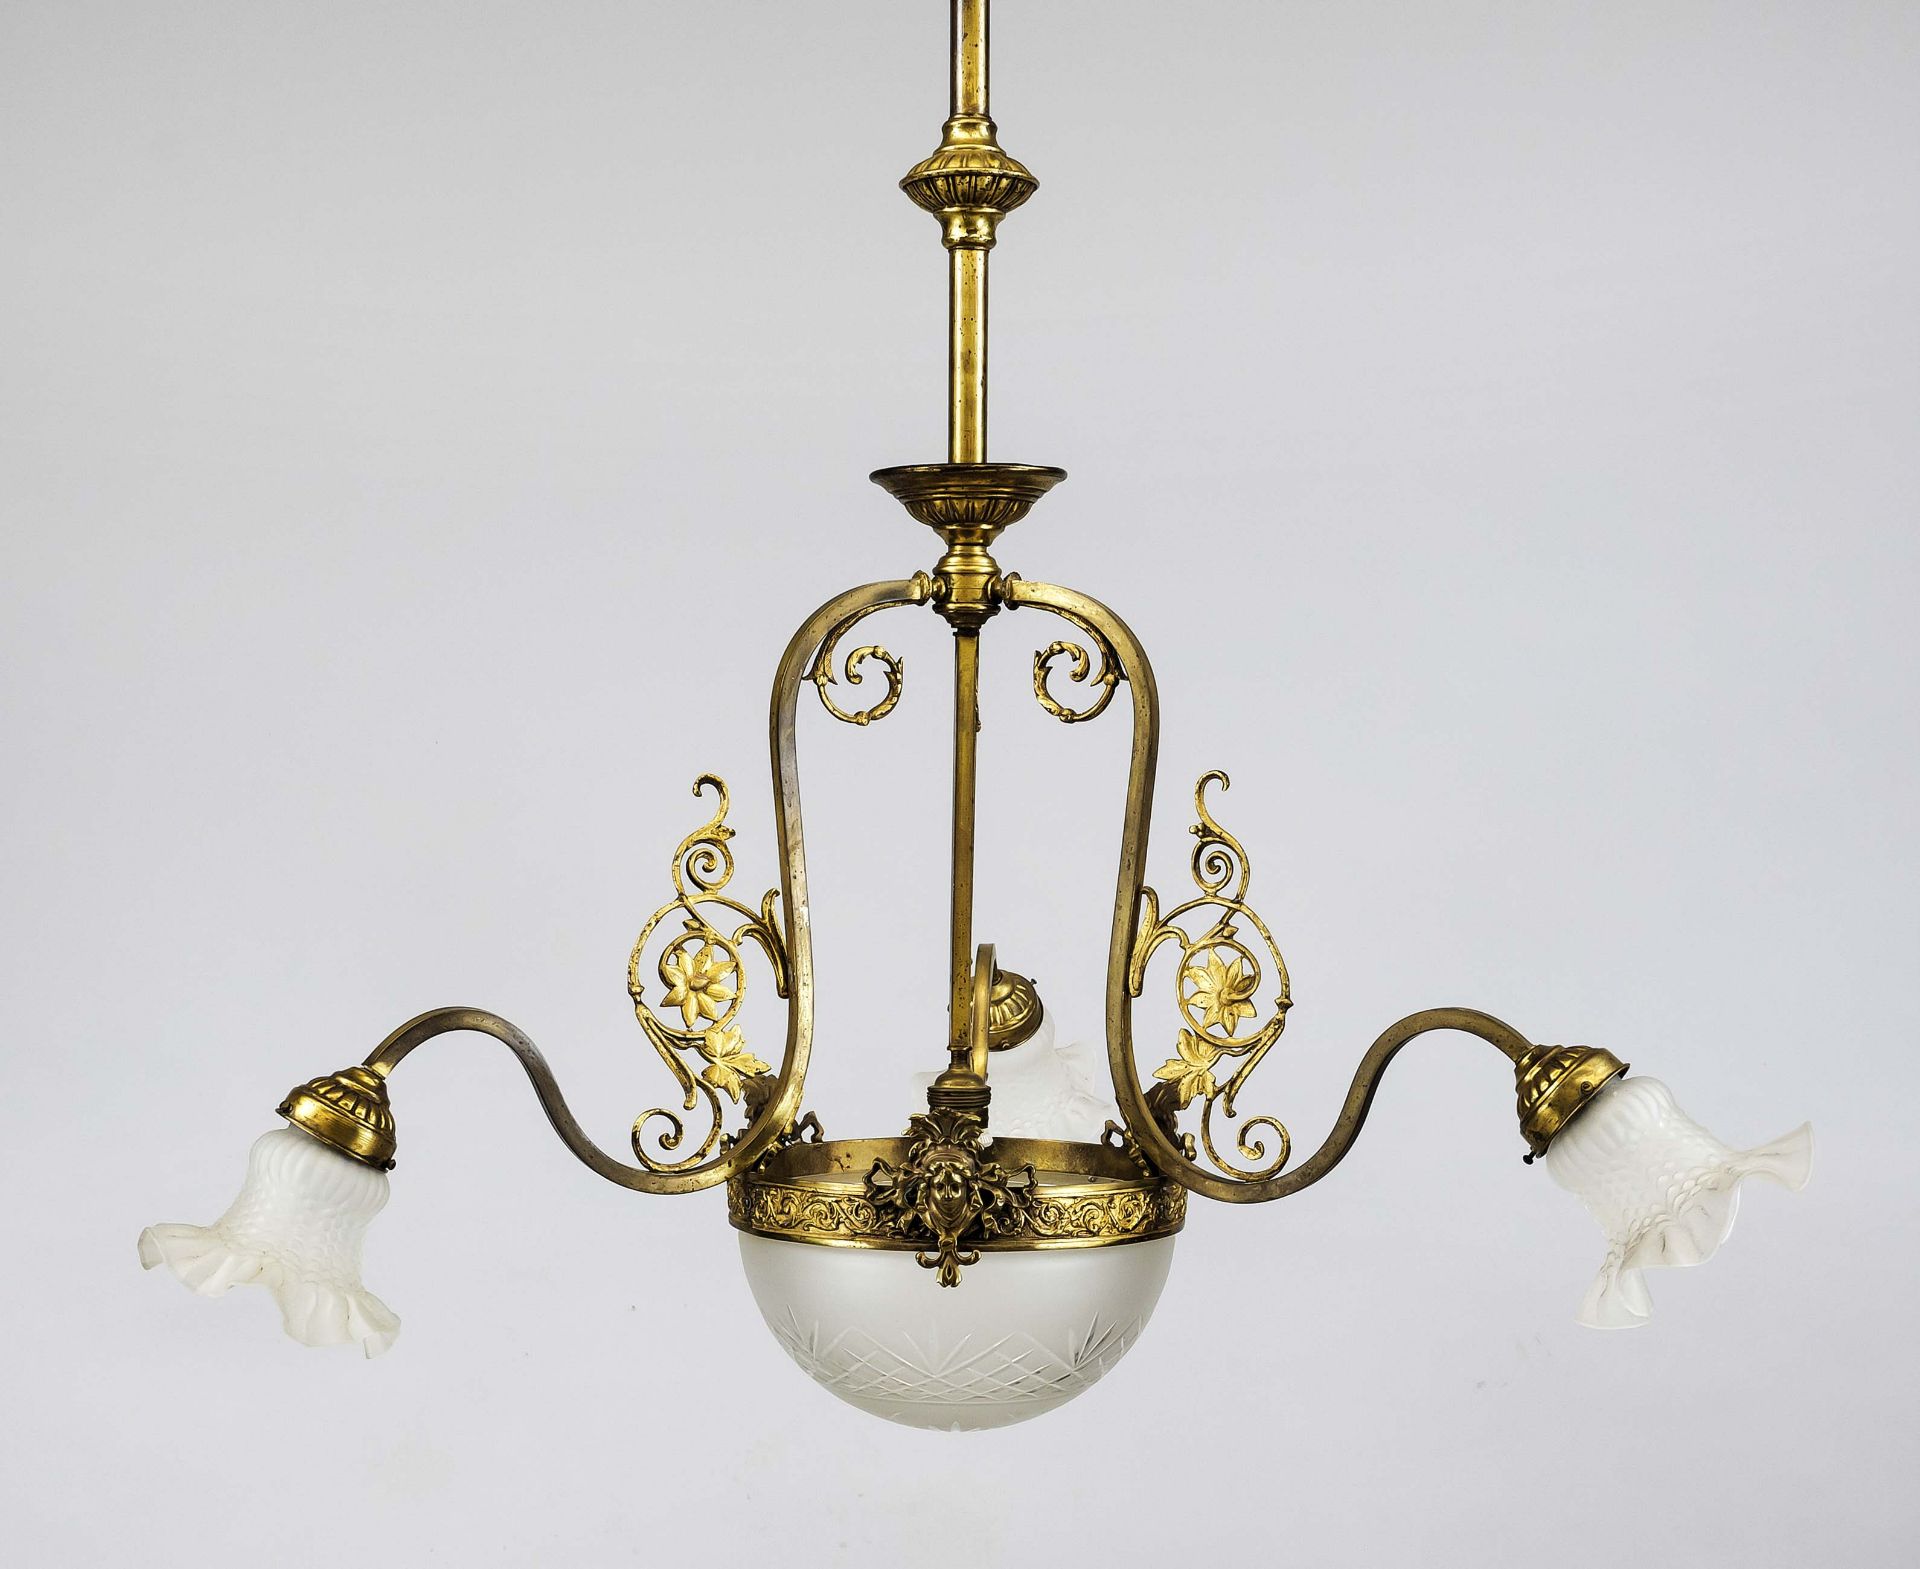 Ceiling lamp, late 19th century Ornamented brass wreath with residual gilding on a three-pass